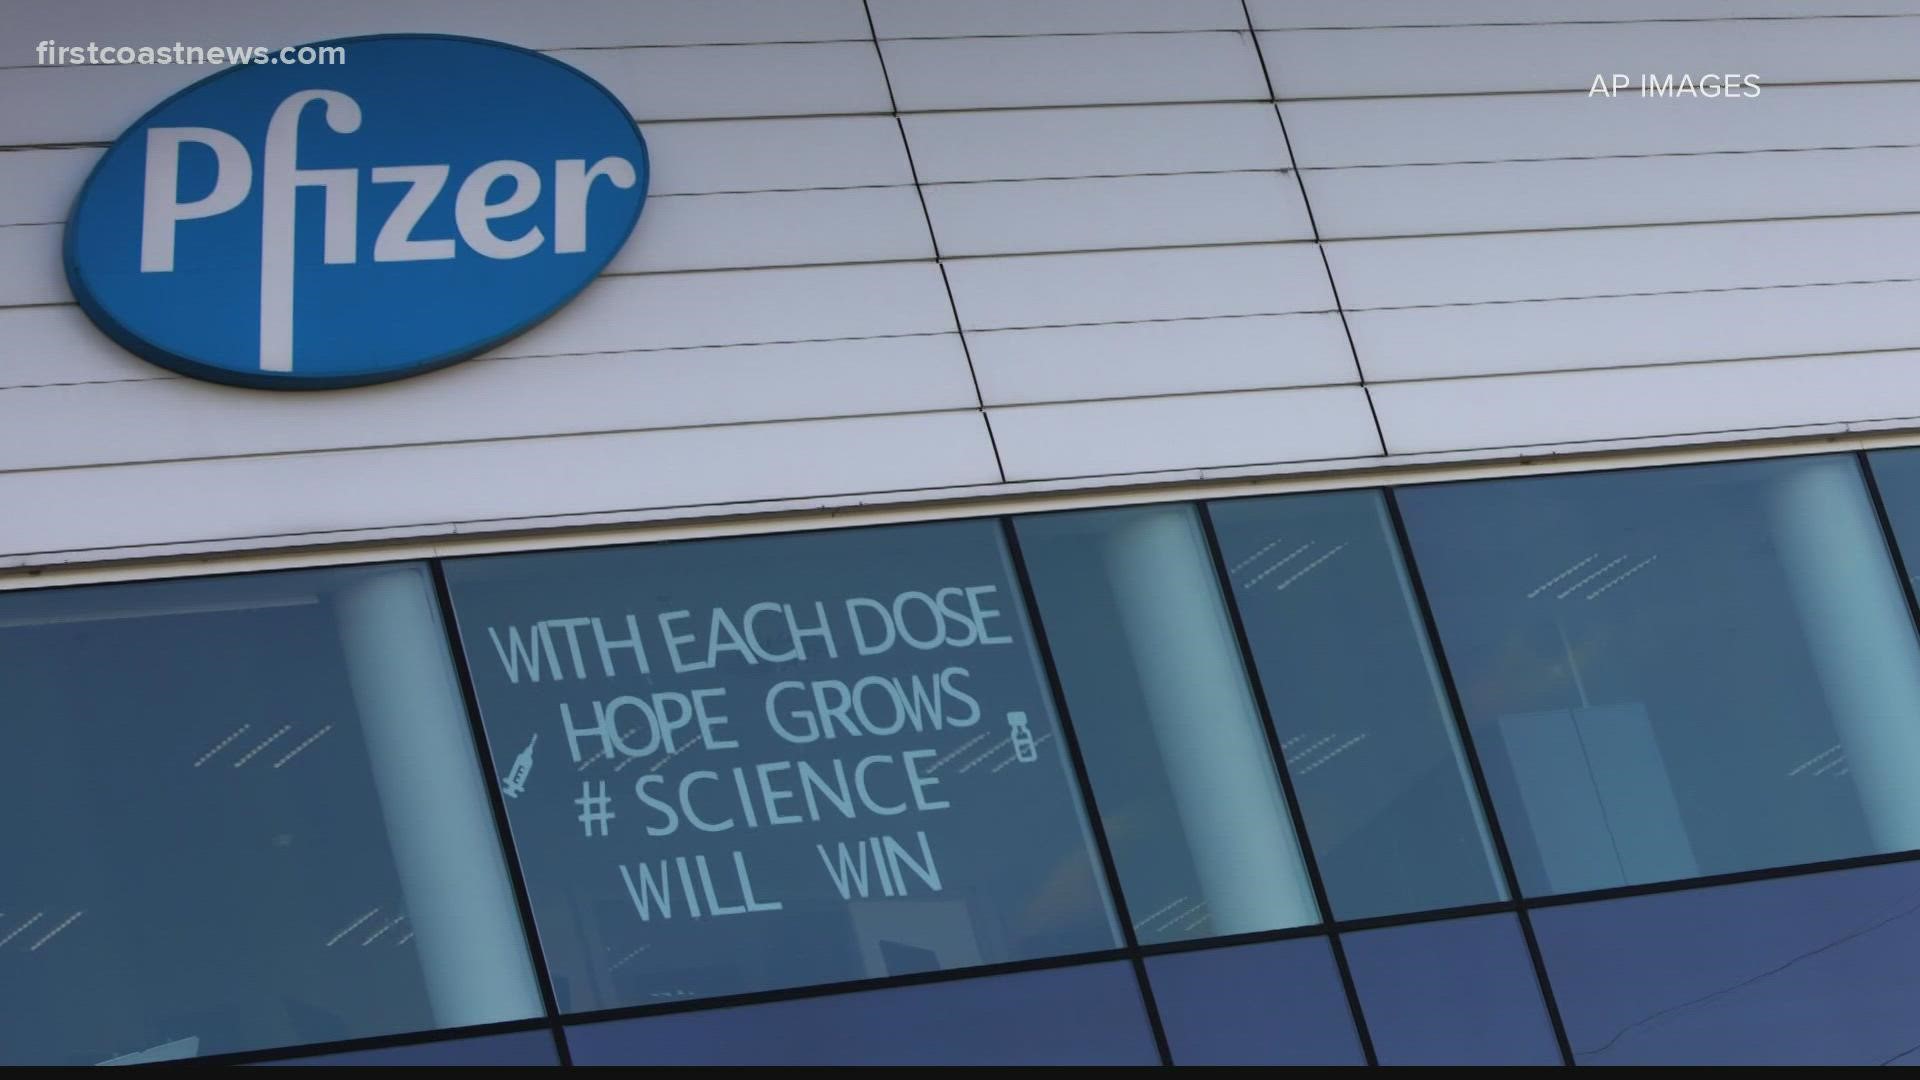 It was announced Tuesday that Pfizer and BioNTech will seek emergency authorization for a second booster shot of their coronavirus vaccine for people 65 and older.